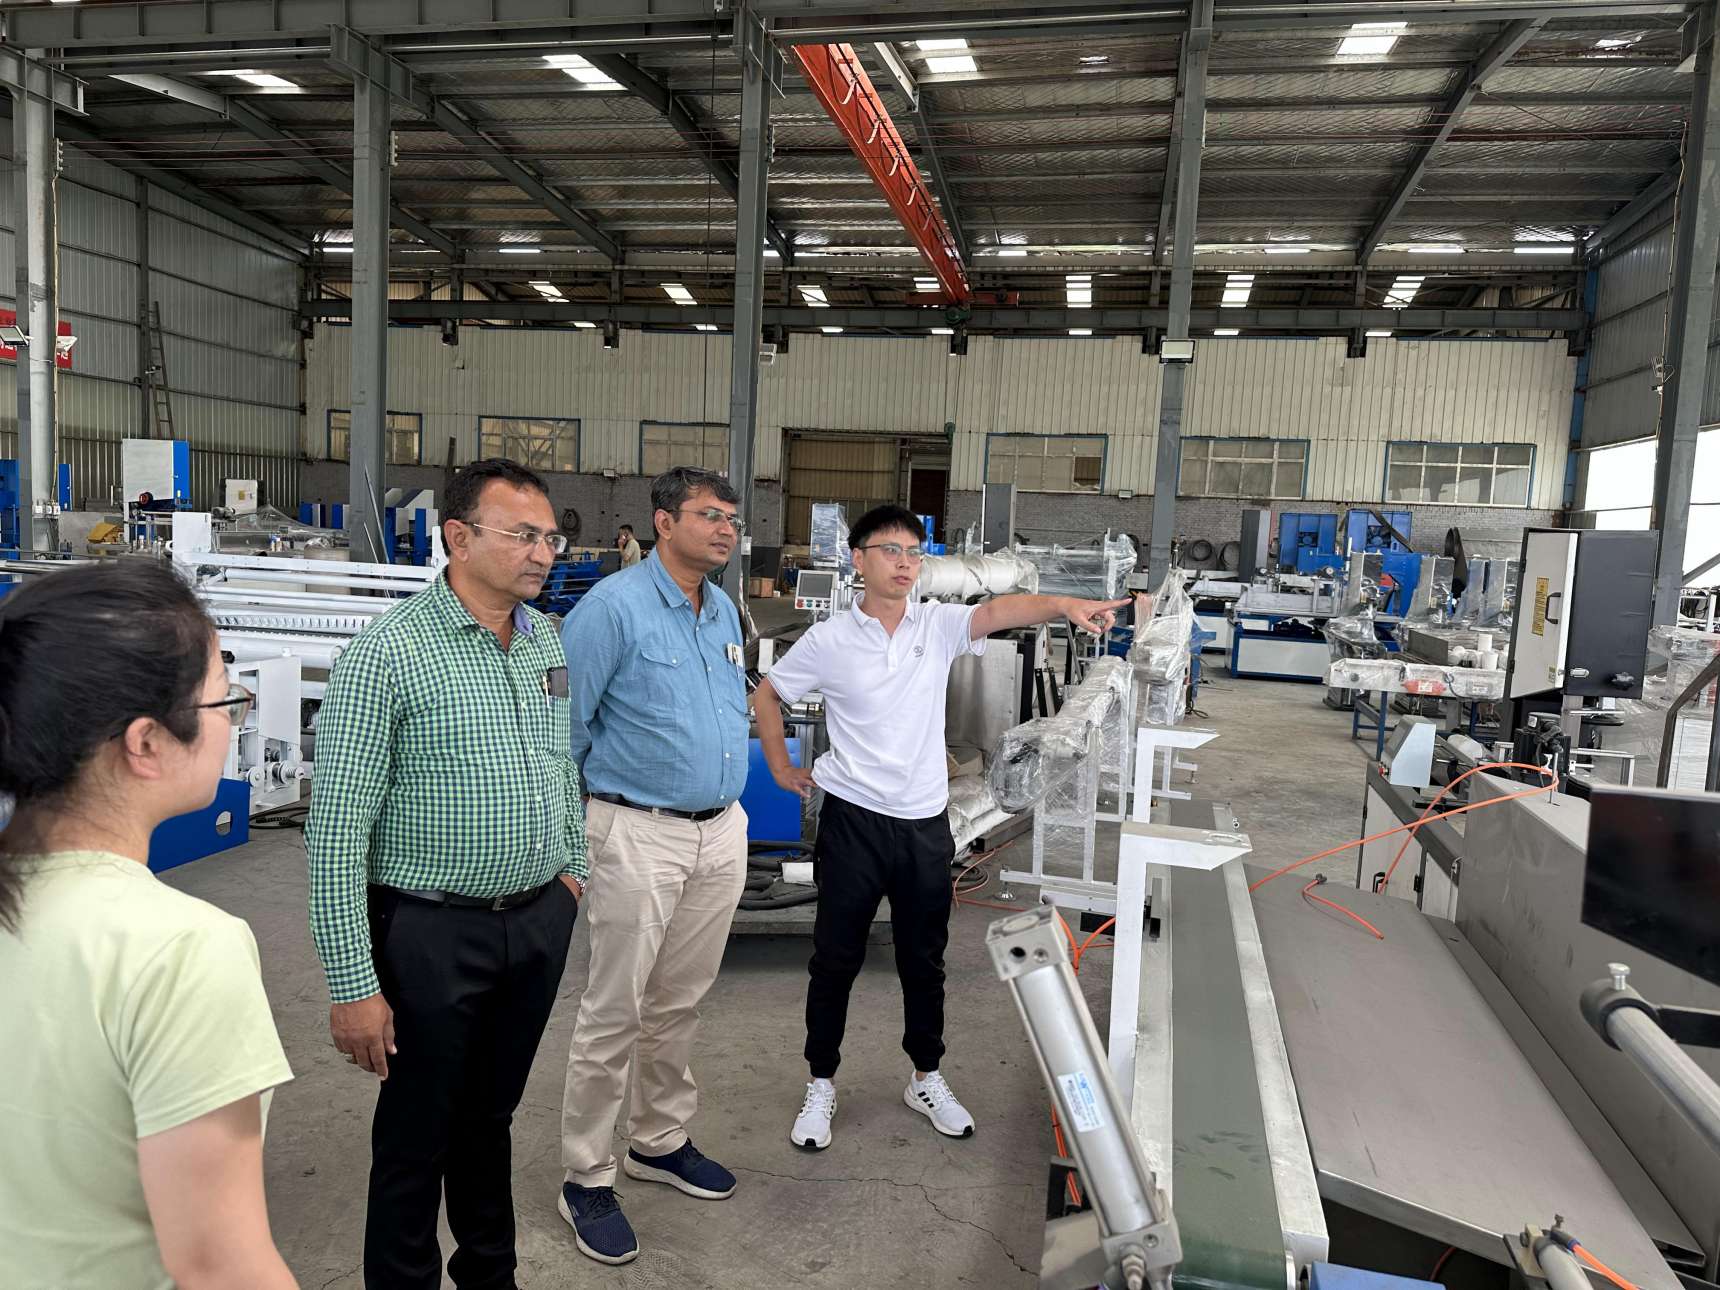 Paper product making machinery carton paper recycling kraft paper production line